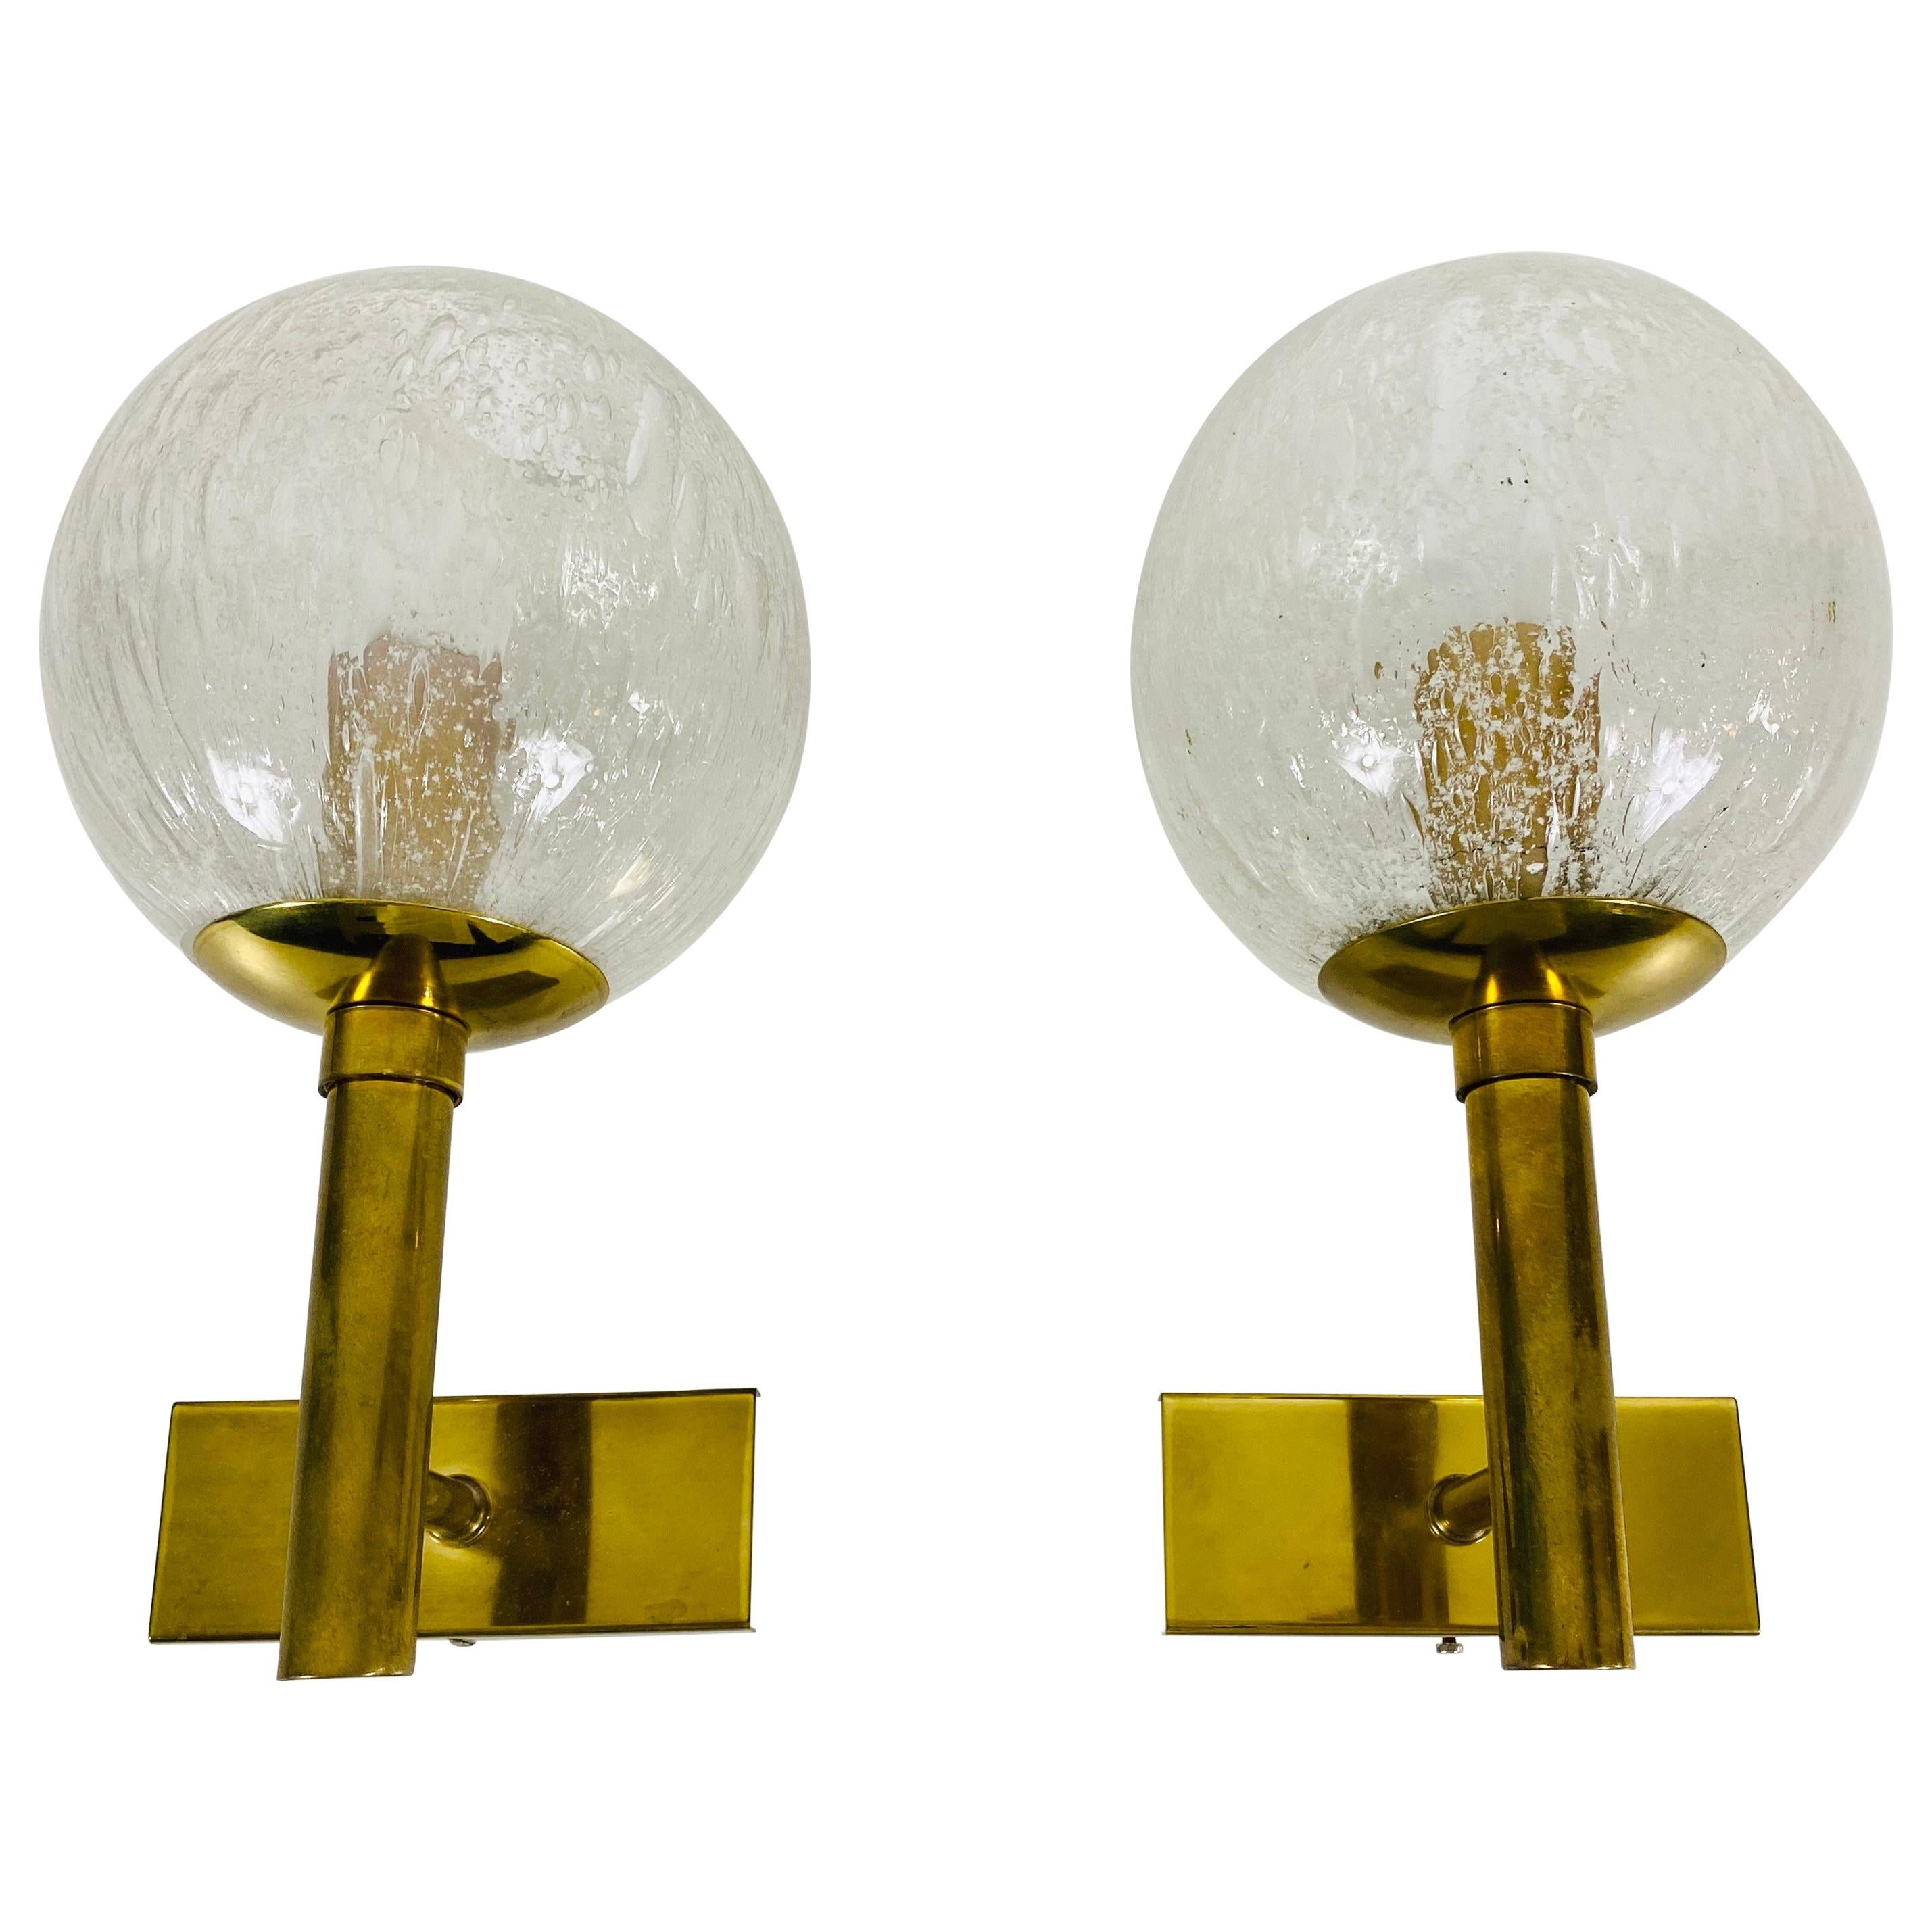 Pair of Hillebrand Brass and Glass Wall Lamps, Germany, 1960s